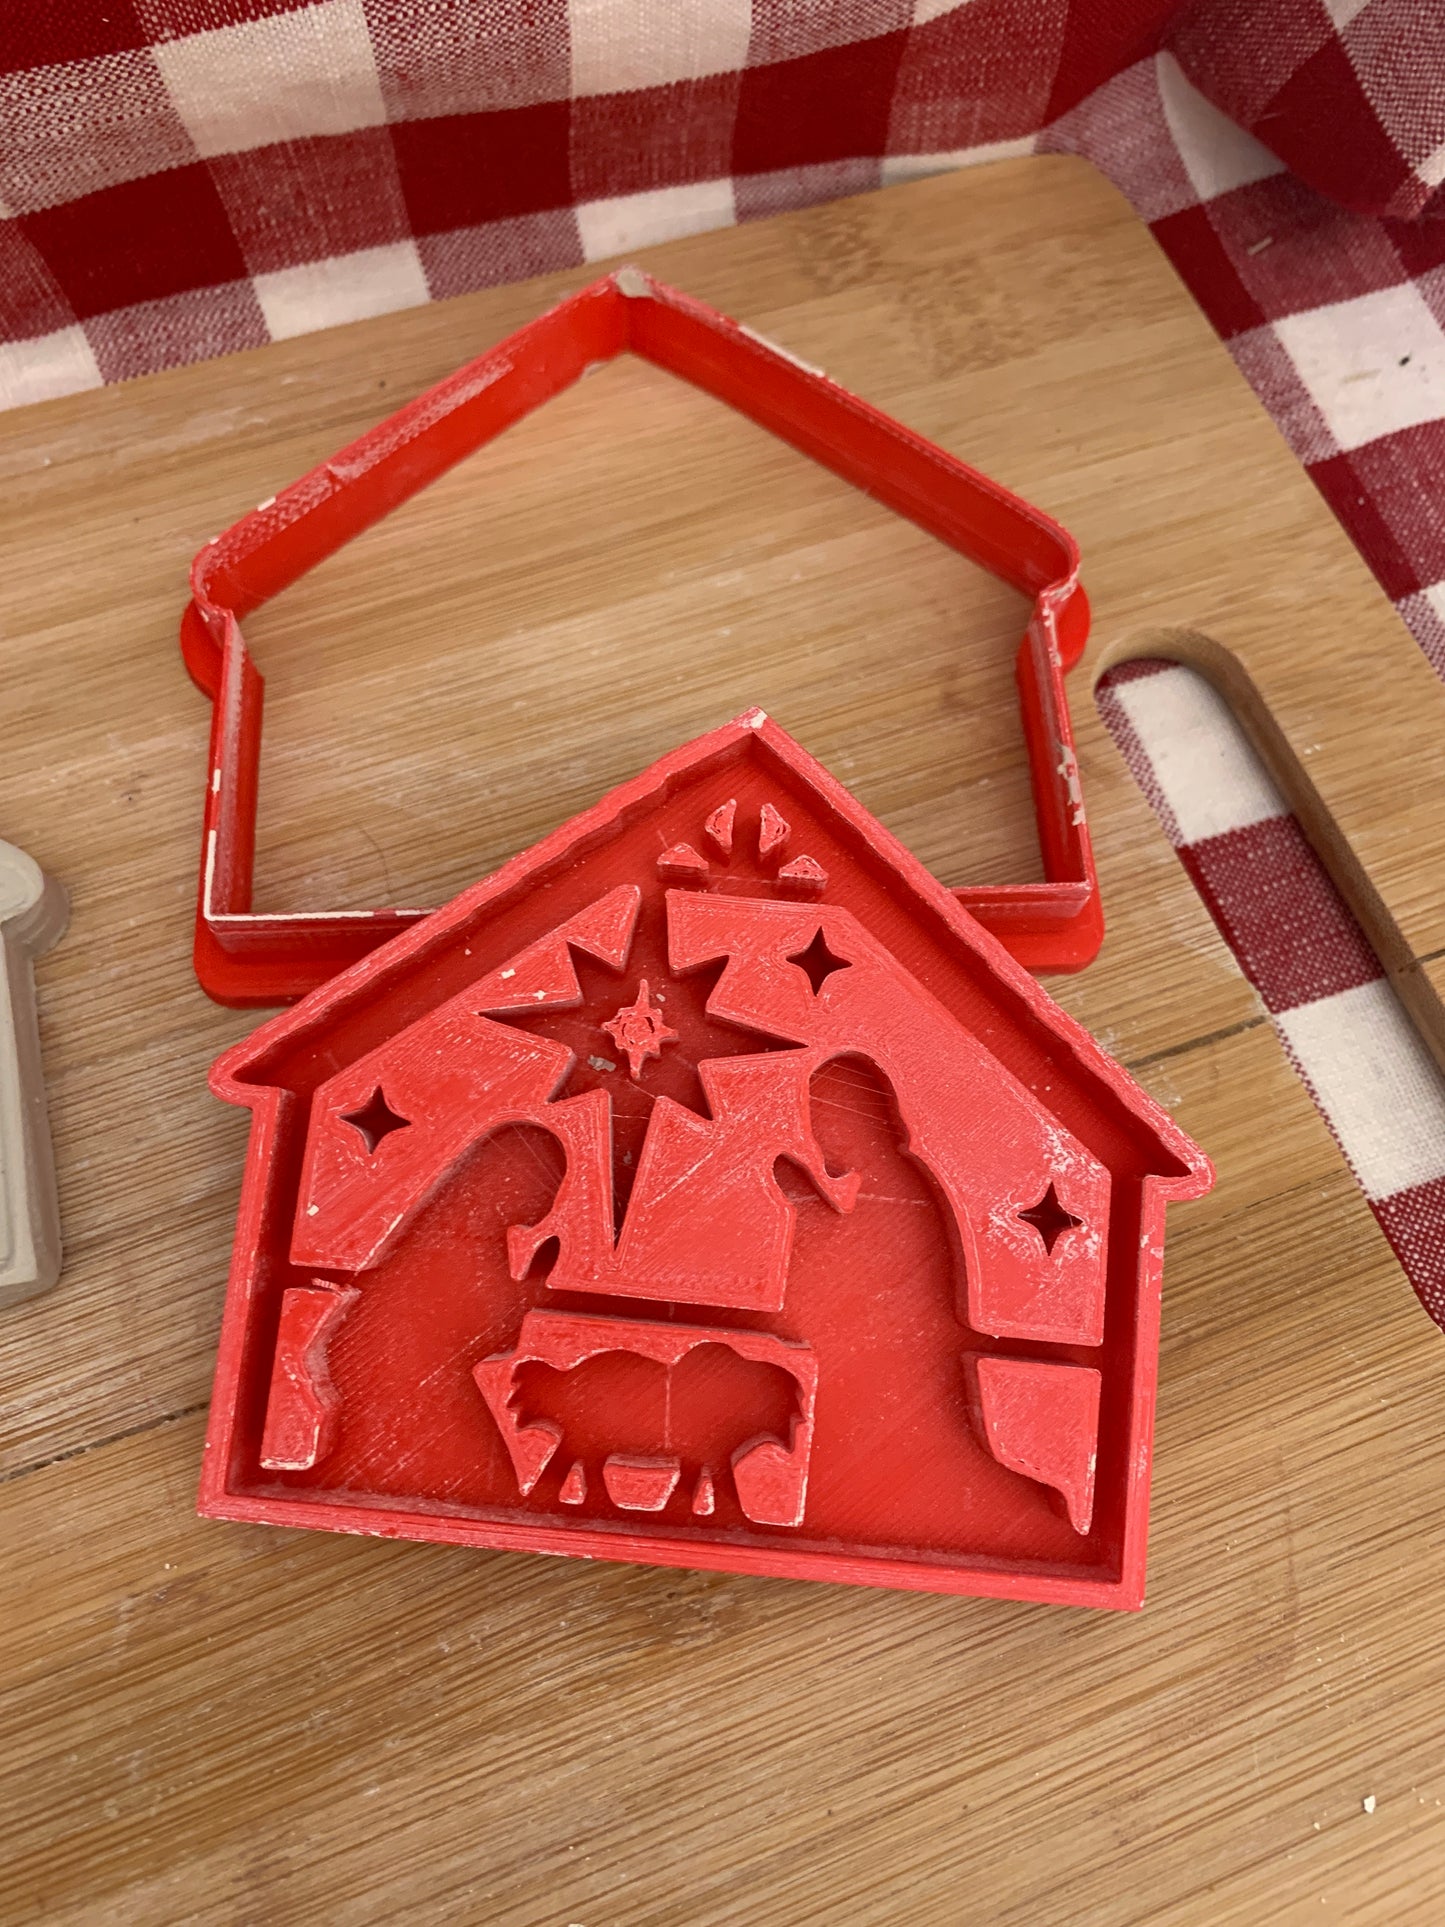 Pottery Stamp, Nativity design, w/ optional ornament cutter - multiple sizes